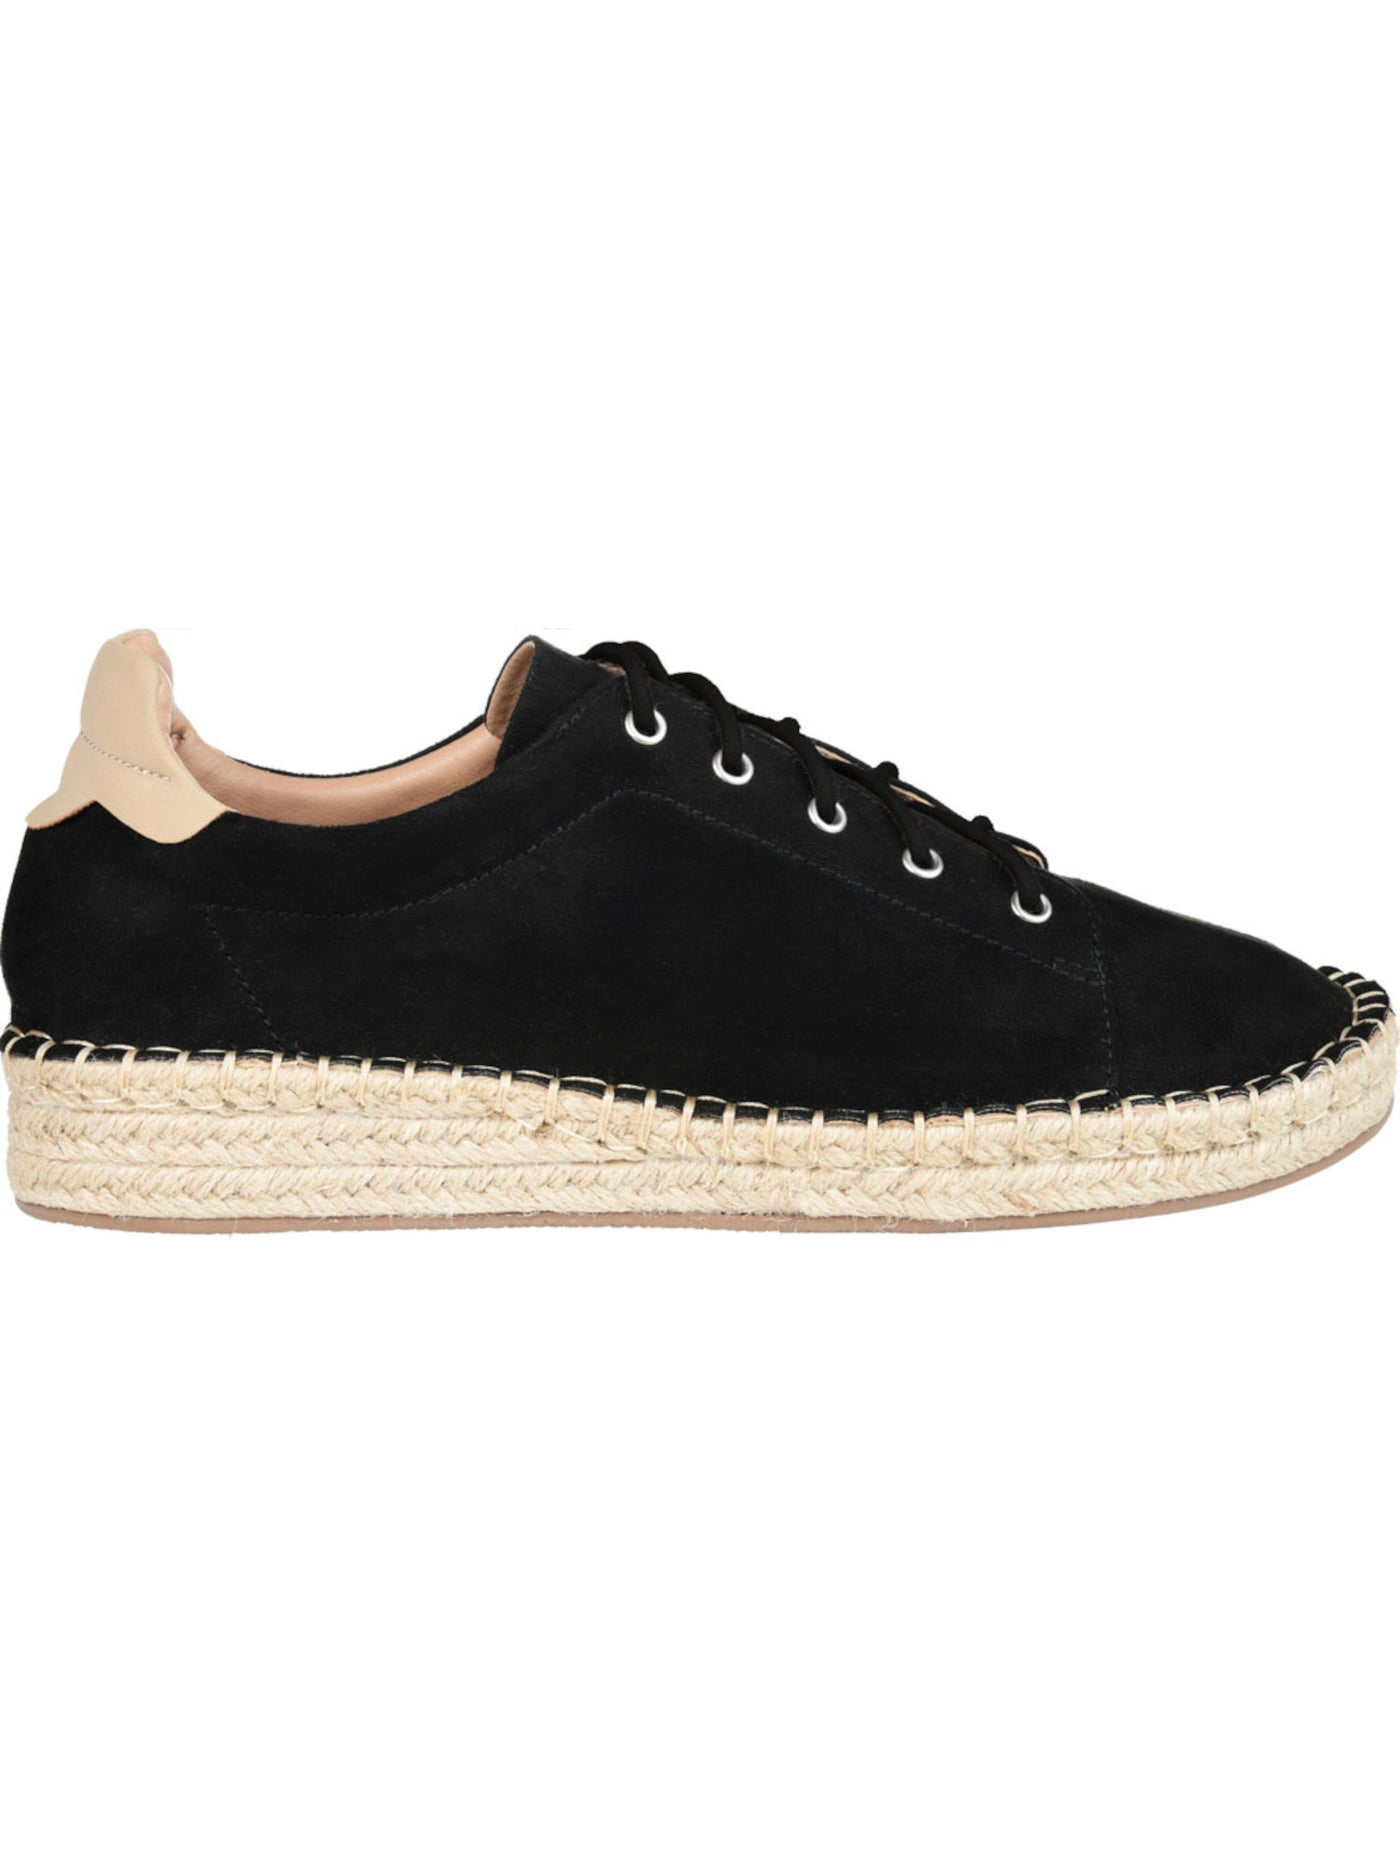 JOURNEE COLLECTION Womens Black Espadrille Detail Whipstitch Accent 1/2" Platform Cushioned Jordi Round Toe Wedge Lace-Up Sneakers Shoes 11 M